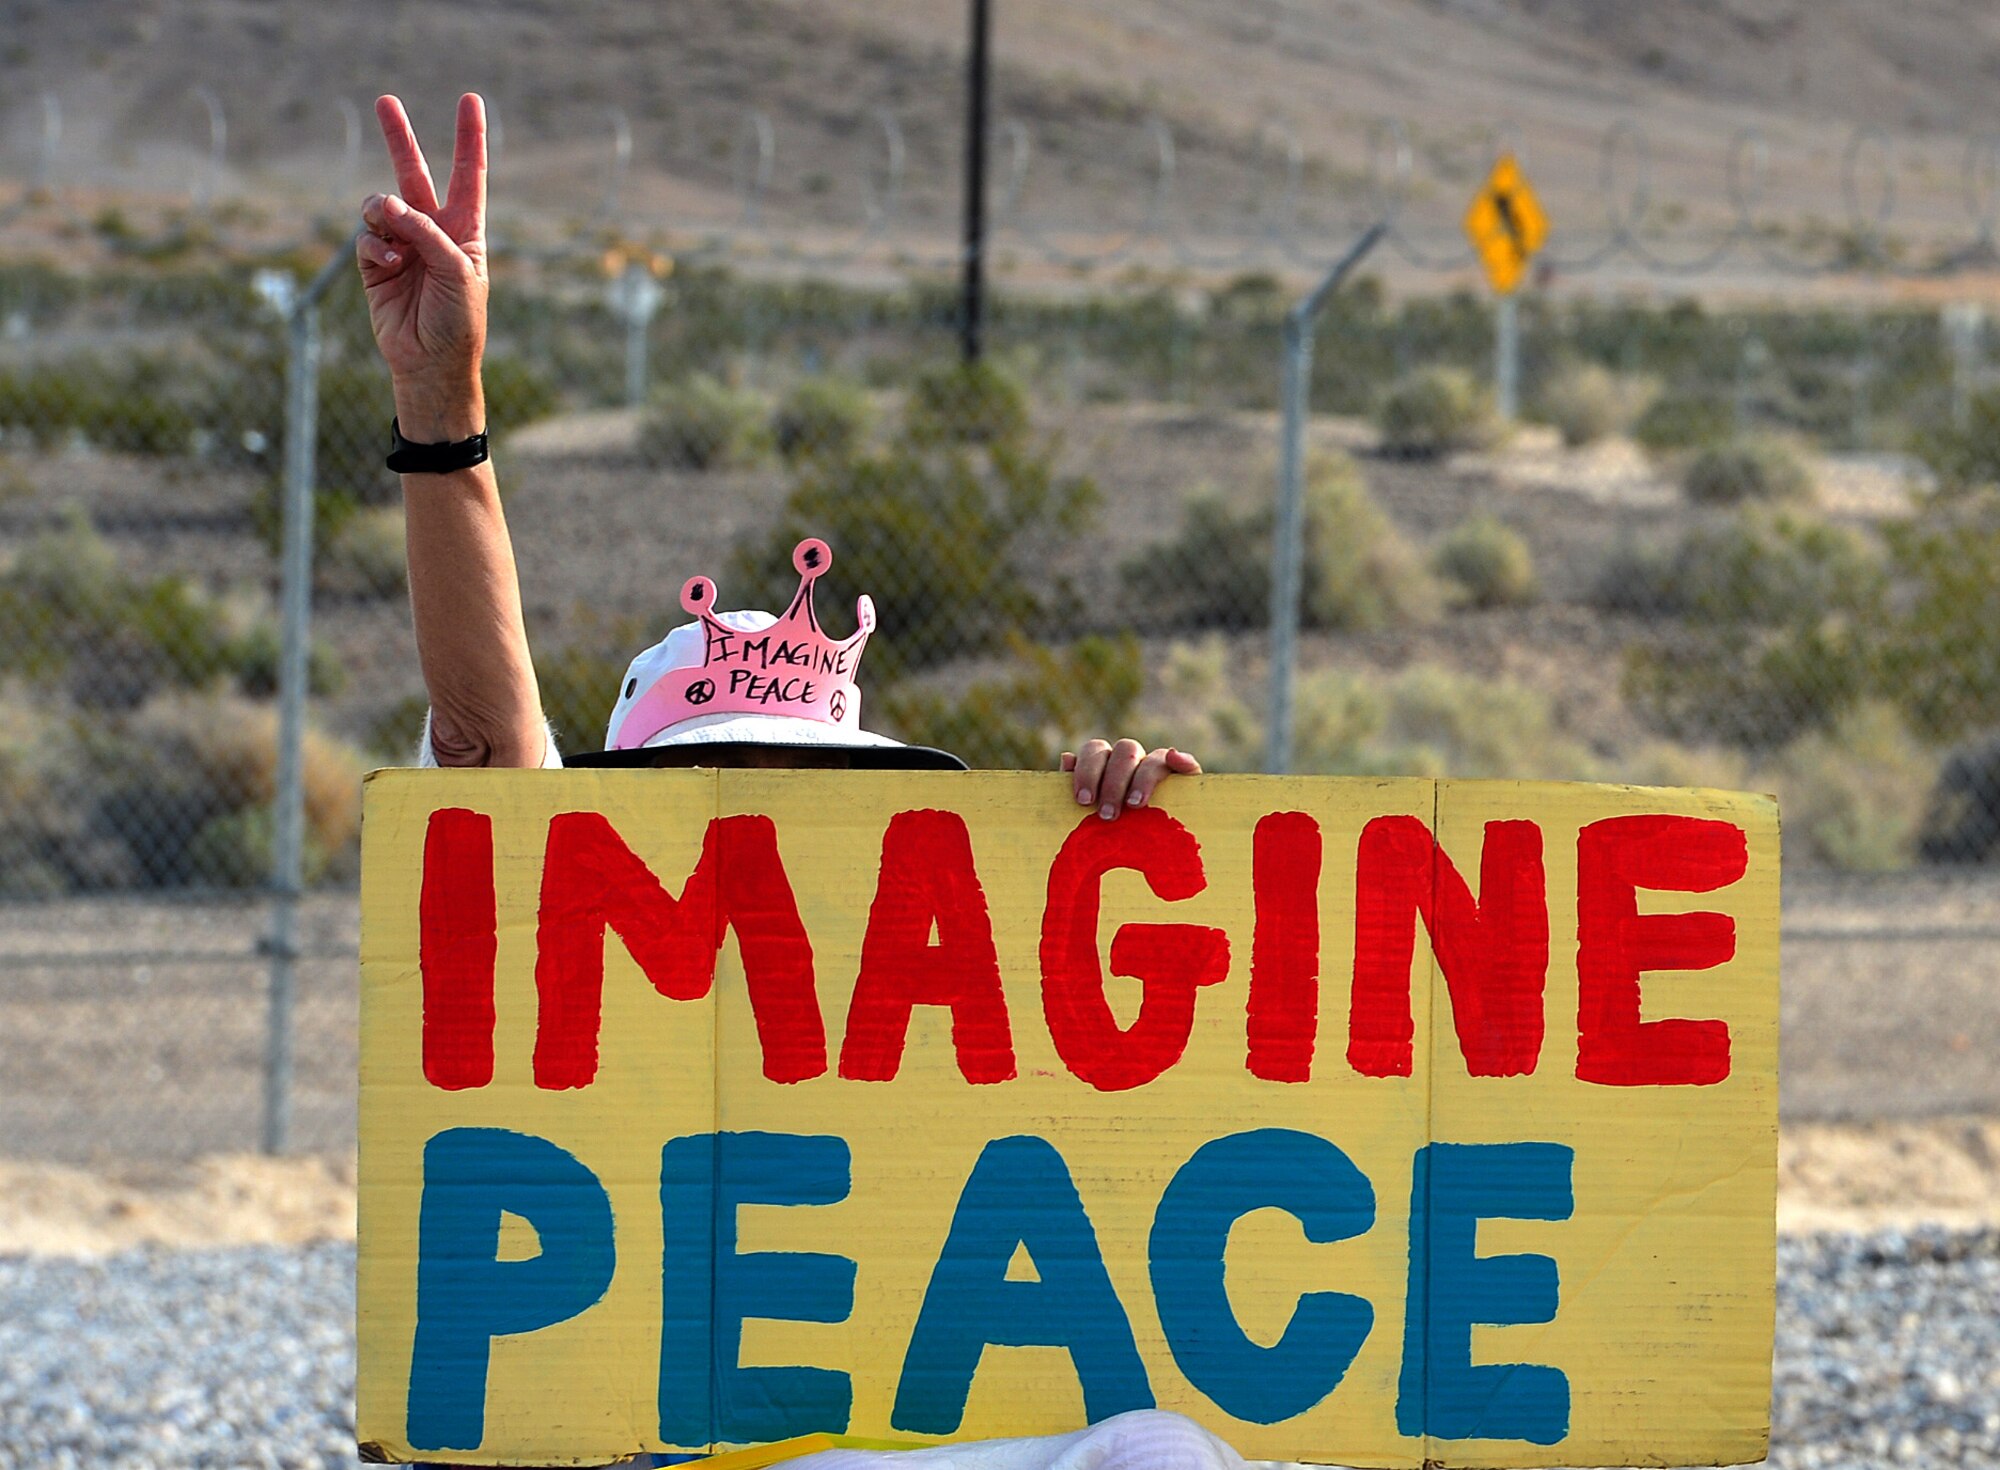 A Code Pink protester sits outside the gates of Creech Air Force Base, Nevada during a peaceful anti-remotely piloted aircraft demonstration April 11, 2014. During the demonstration, anti-war songs were played and skits were acted out by the protesters. (U.S. Air Force photo by Staff Sgt. Nadine Barclay/Released)